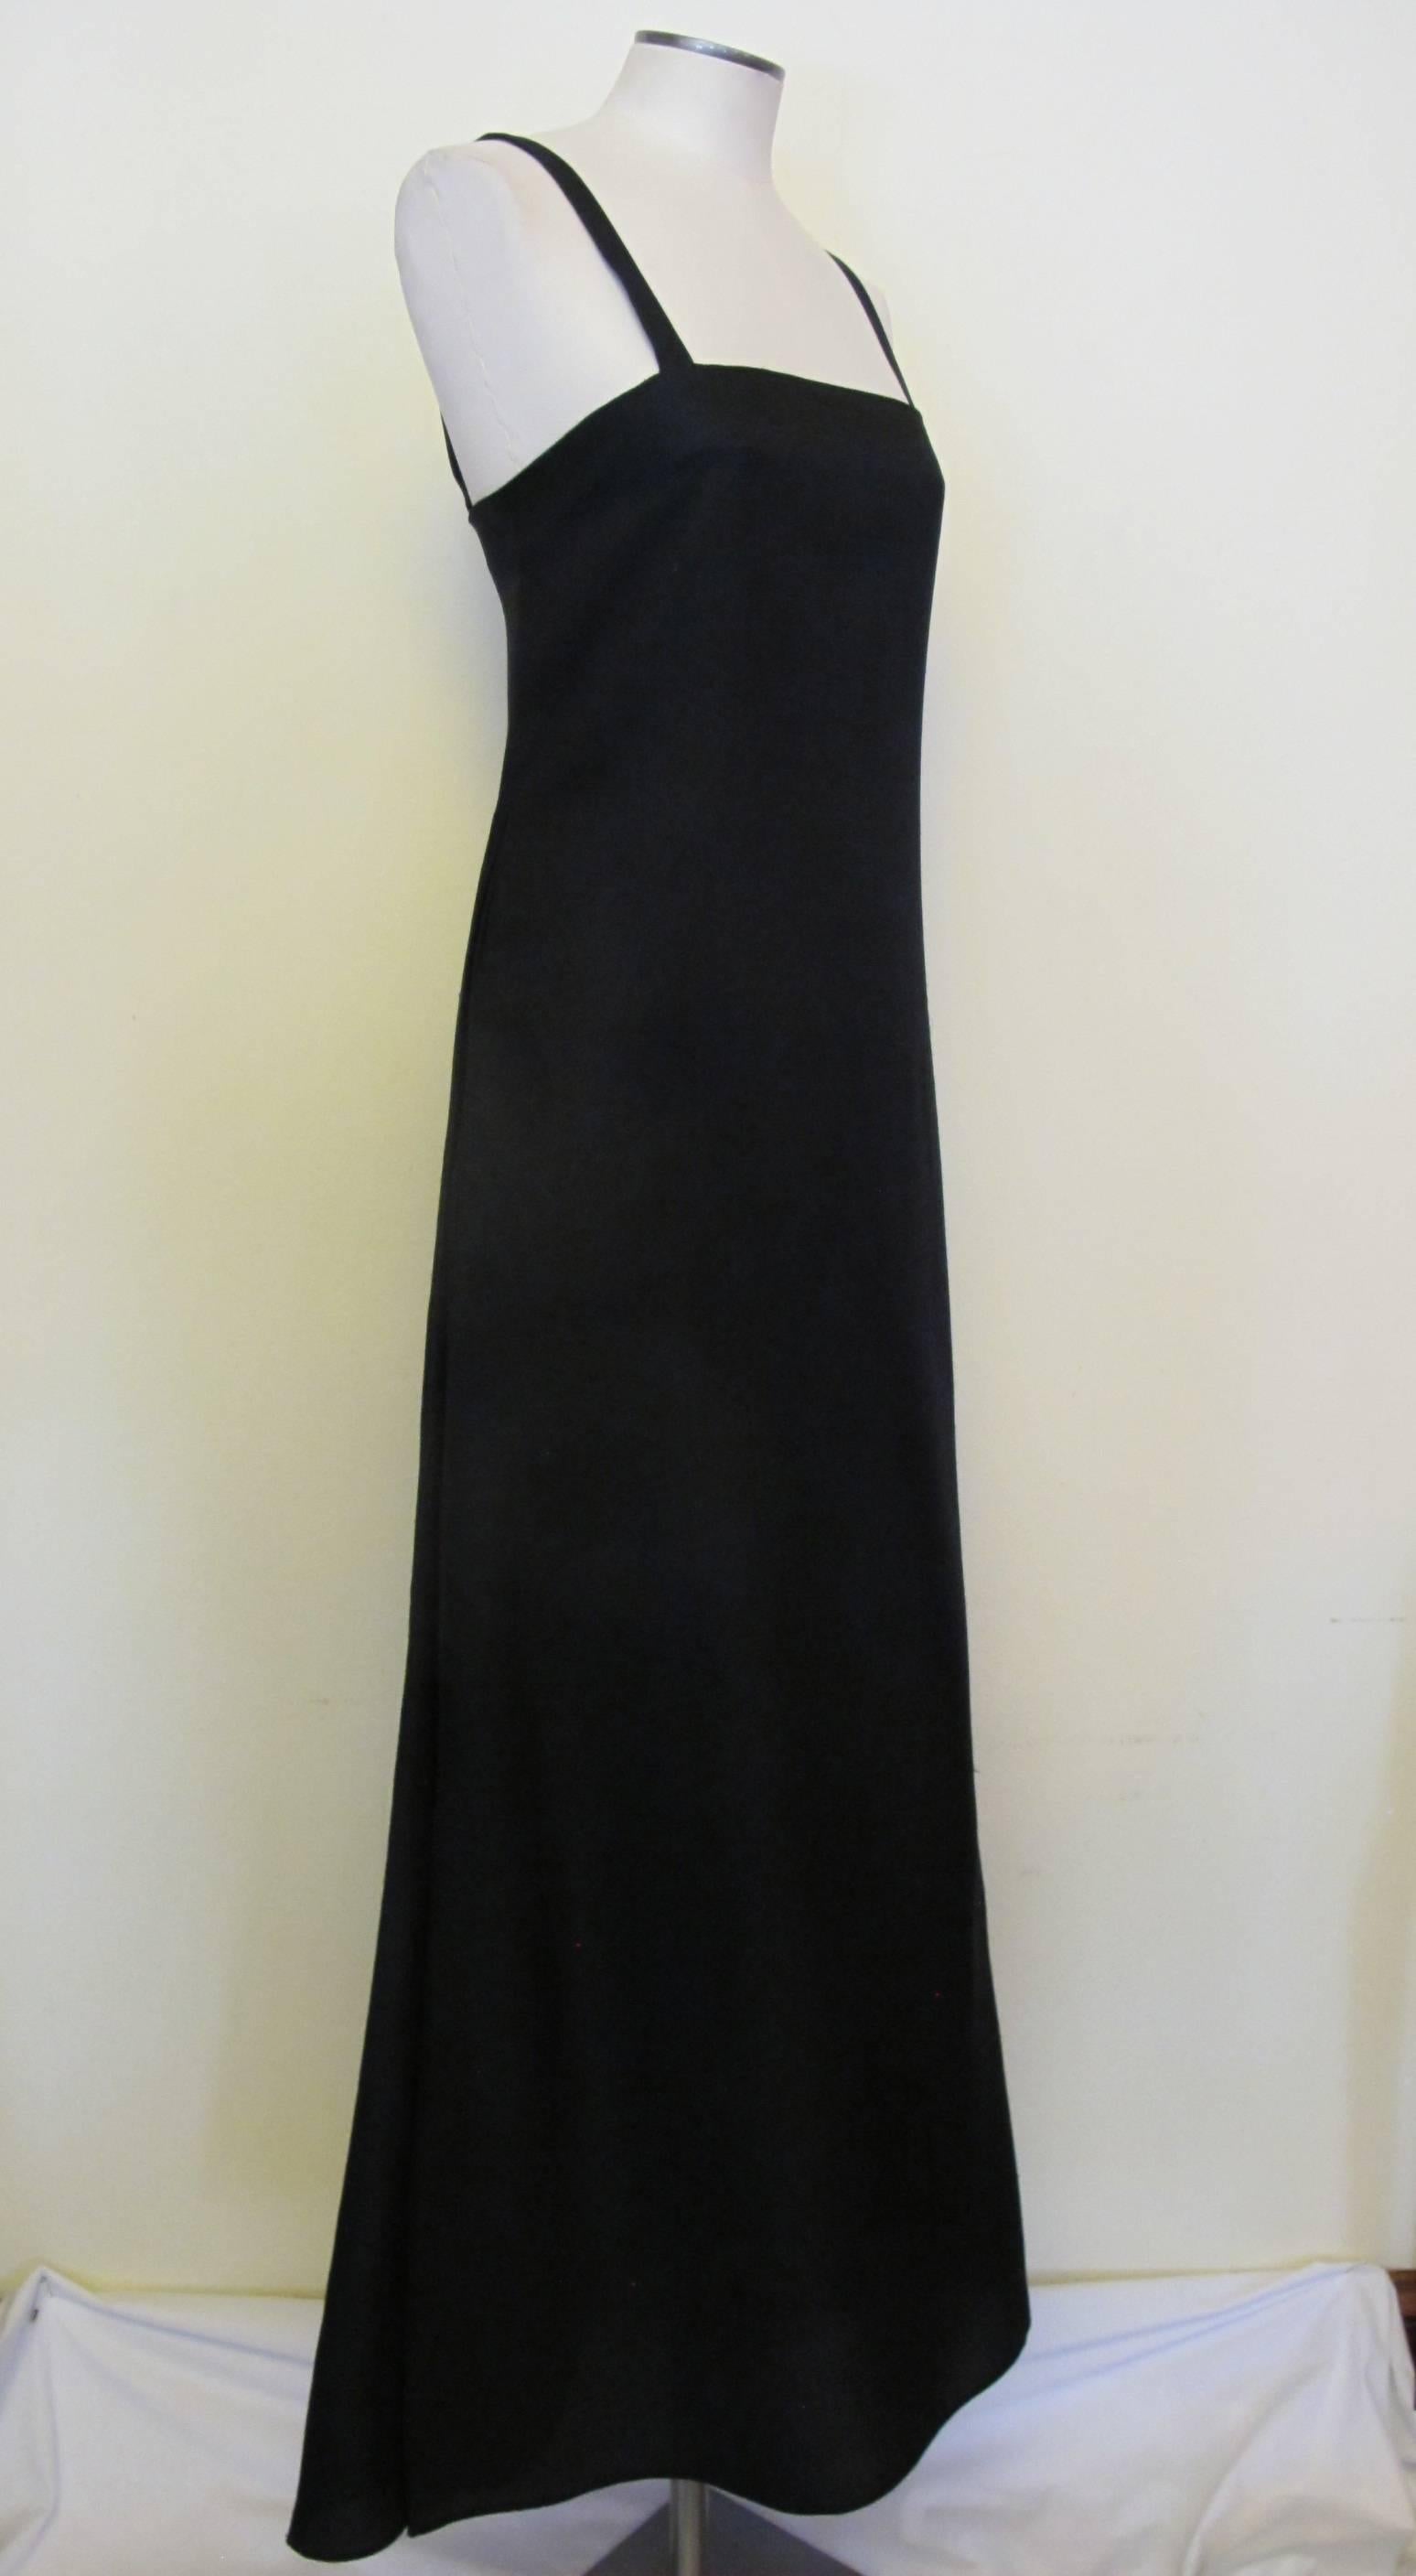 The feel of Audrey Hepburn's iconic style is inherent in this elegant, black silk bazar evening gown. It is symbolic of the effortless style of Miss Hepburn which remains classic and the epitome of sophistication. 